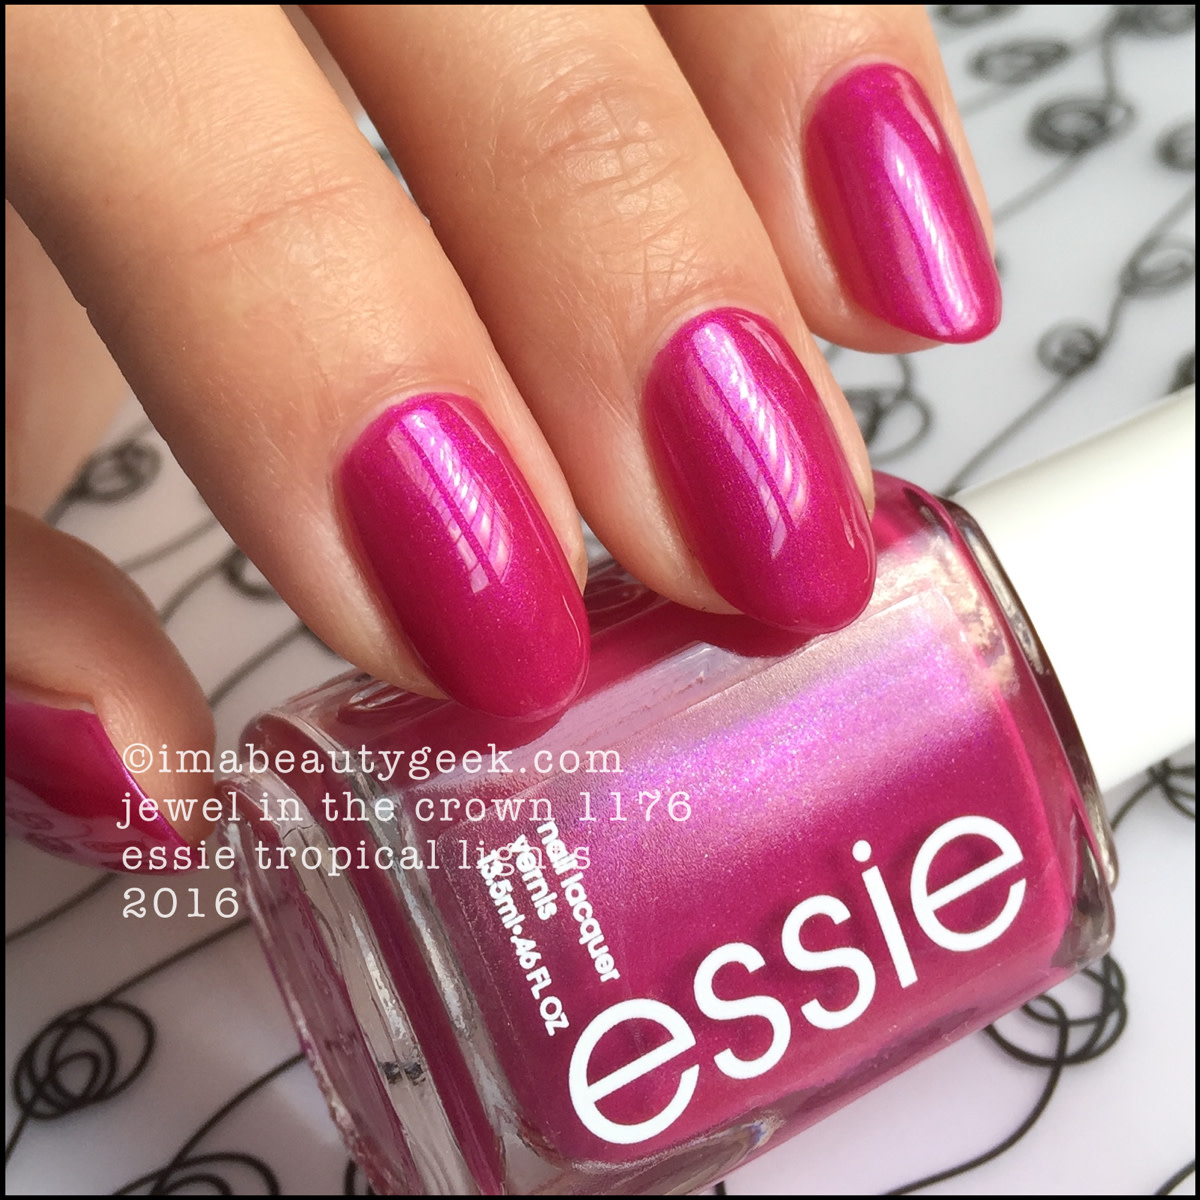 Essie Jewel in the Crown 1176_Essie Tropical Lights Collection 2016